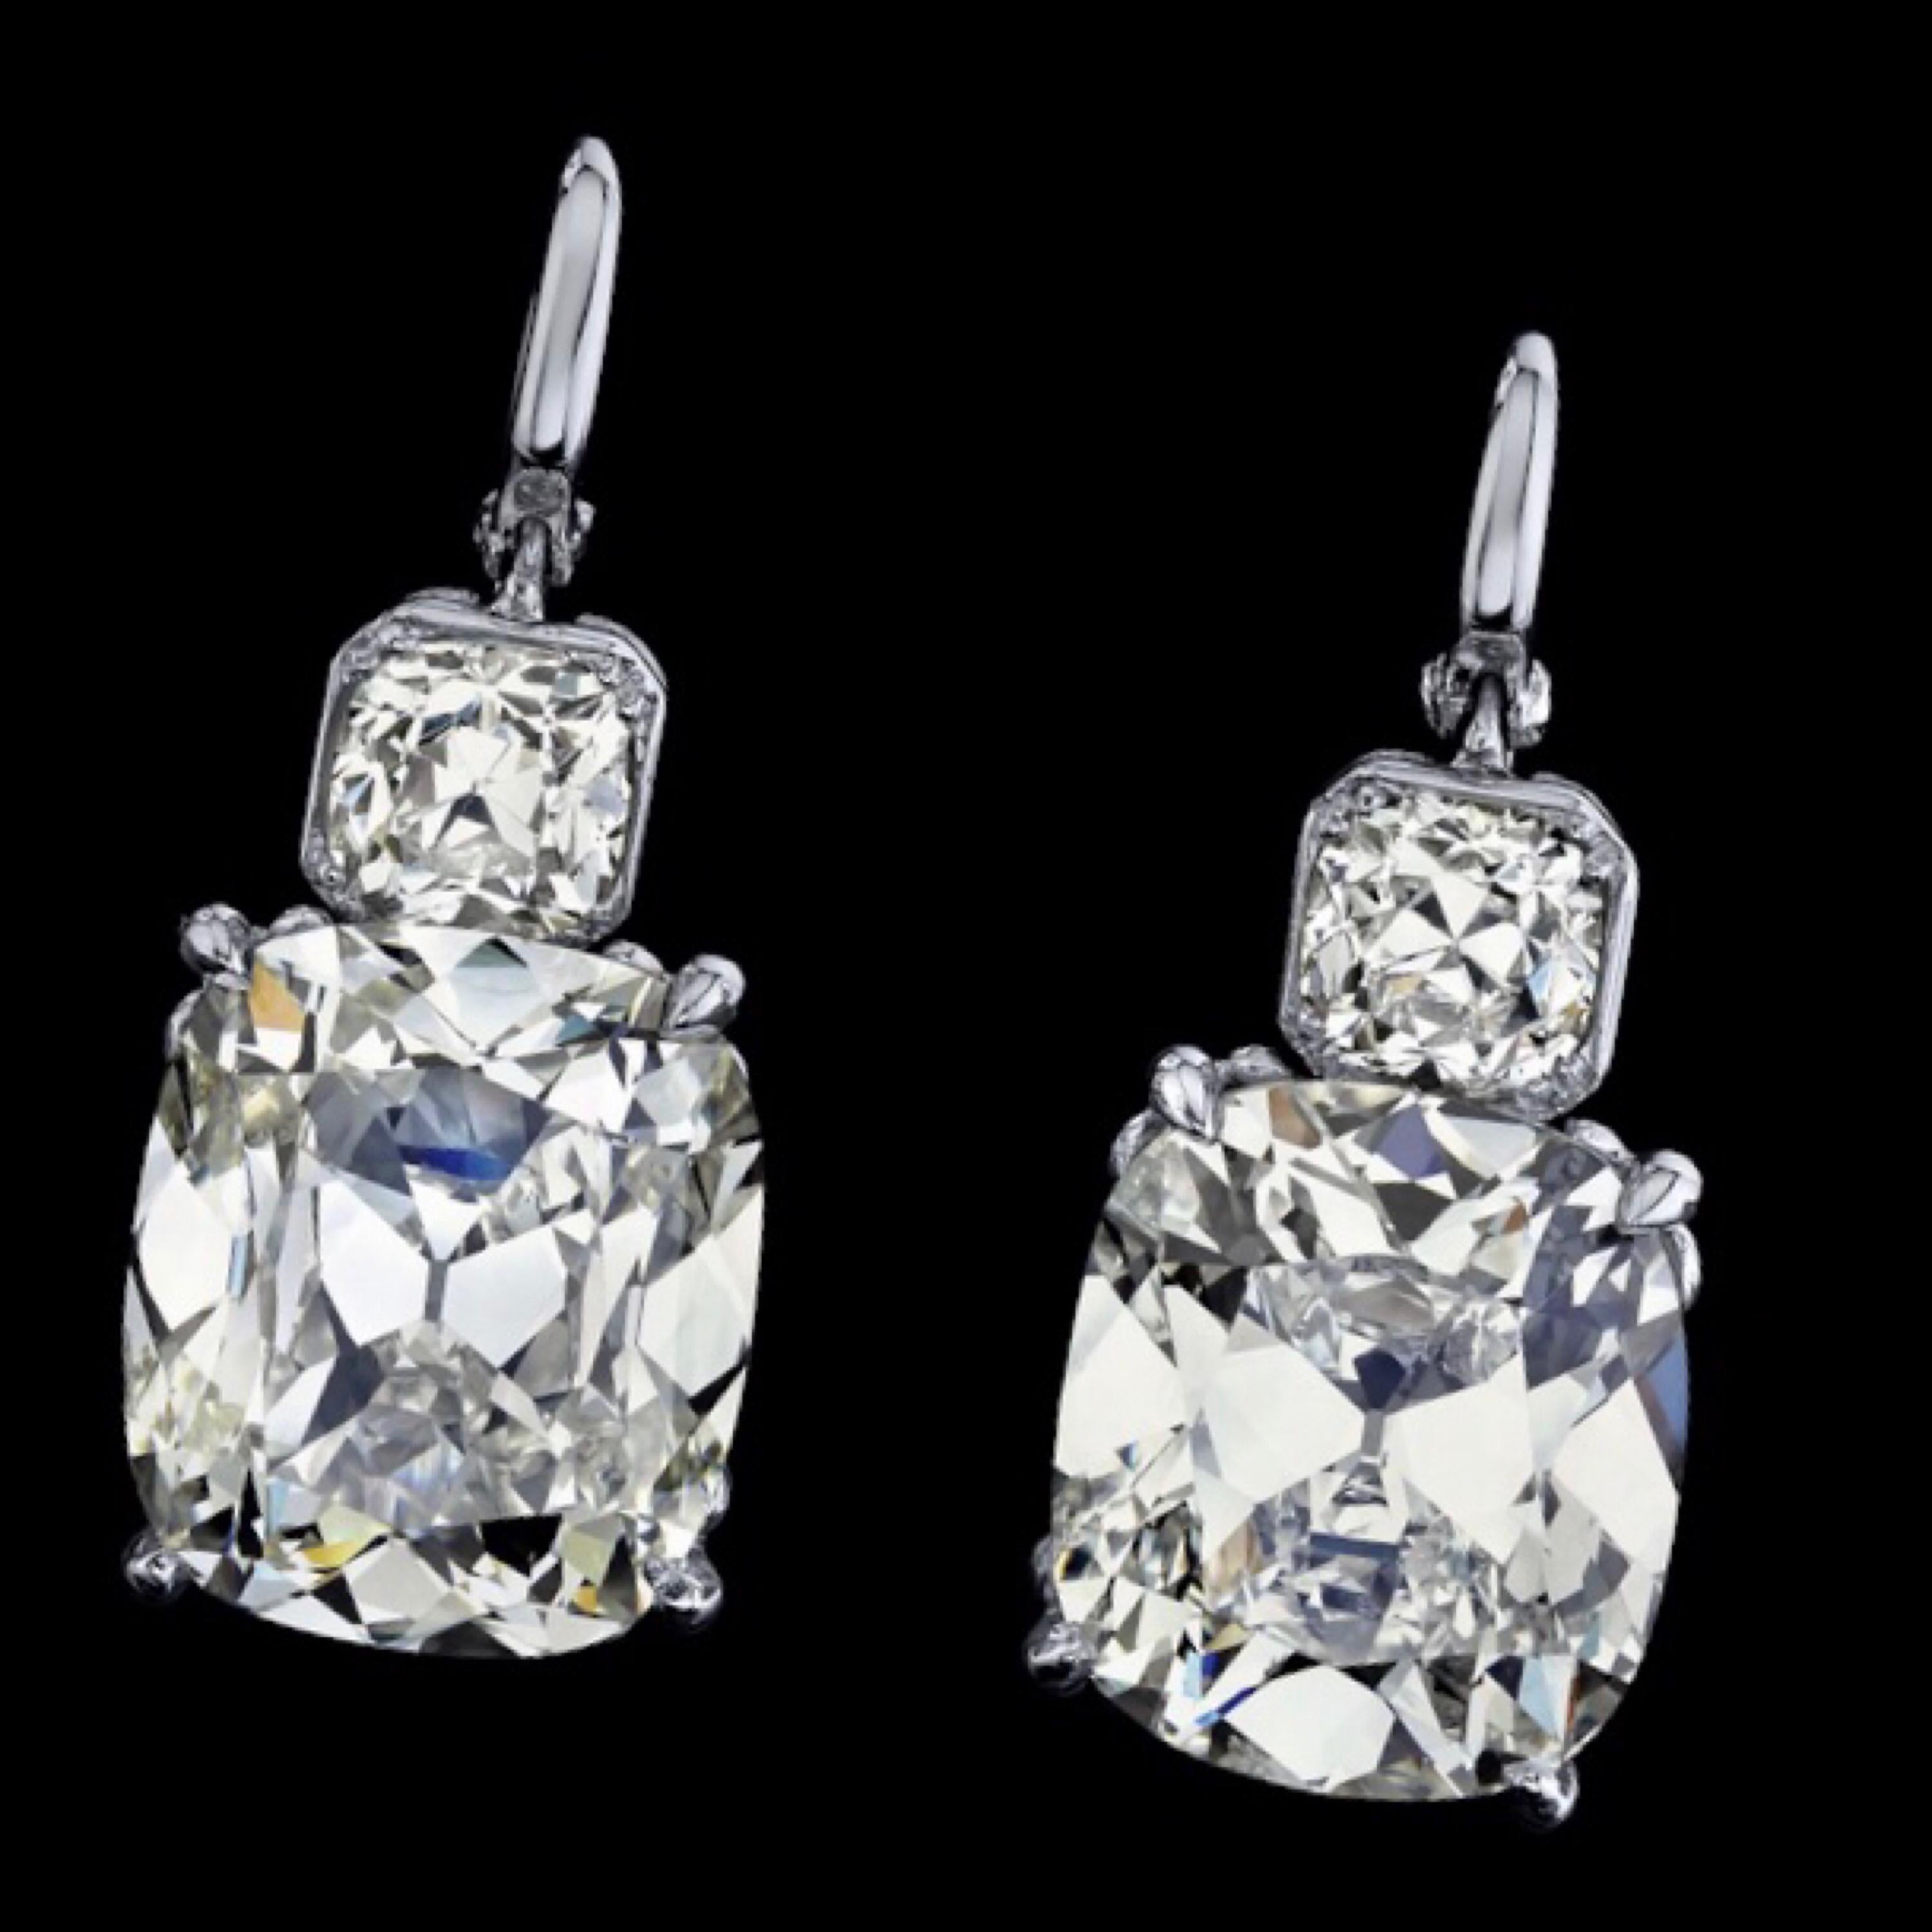 From the Emilio Jewelry Vault, Showcasing a stunning 12.00 carat total weight pair of old mine diamondsGia Certified.
Please inquire for more images, the certificate, diamond weights, or appraisals. Custom re-design available.
These earrings were